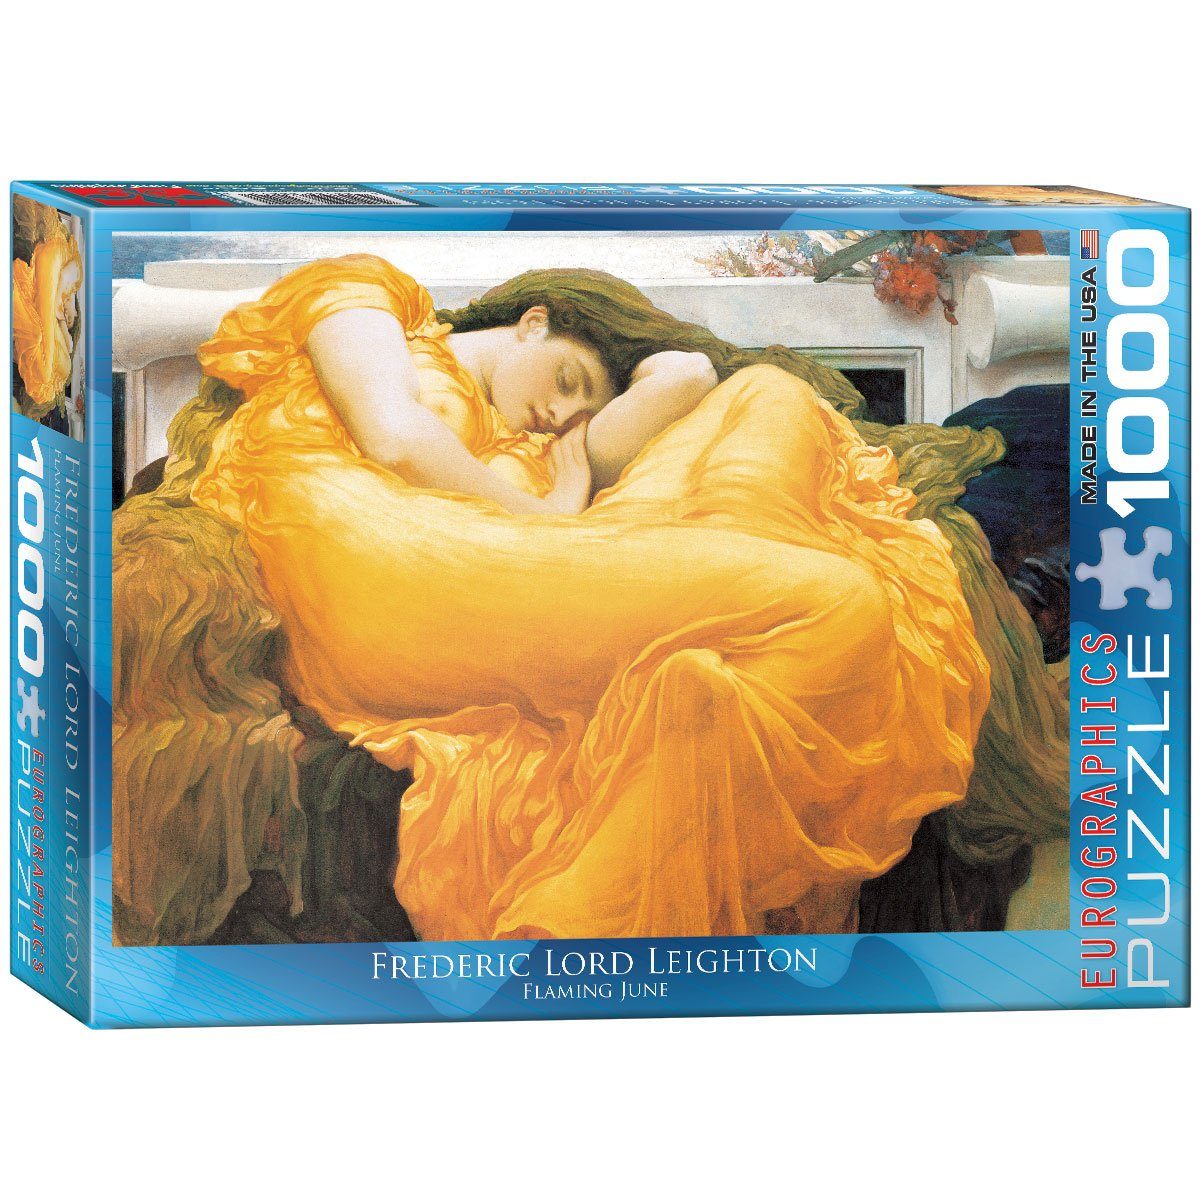 June 1000 Puzzleteile EUROGRAPHICS 6000-3214 Flaming EuroGraphics Leighton, Lord Puzzle